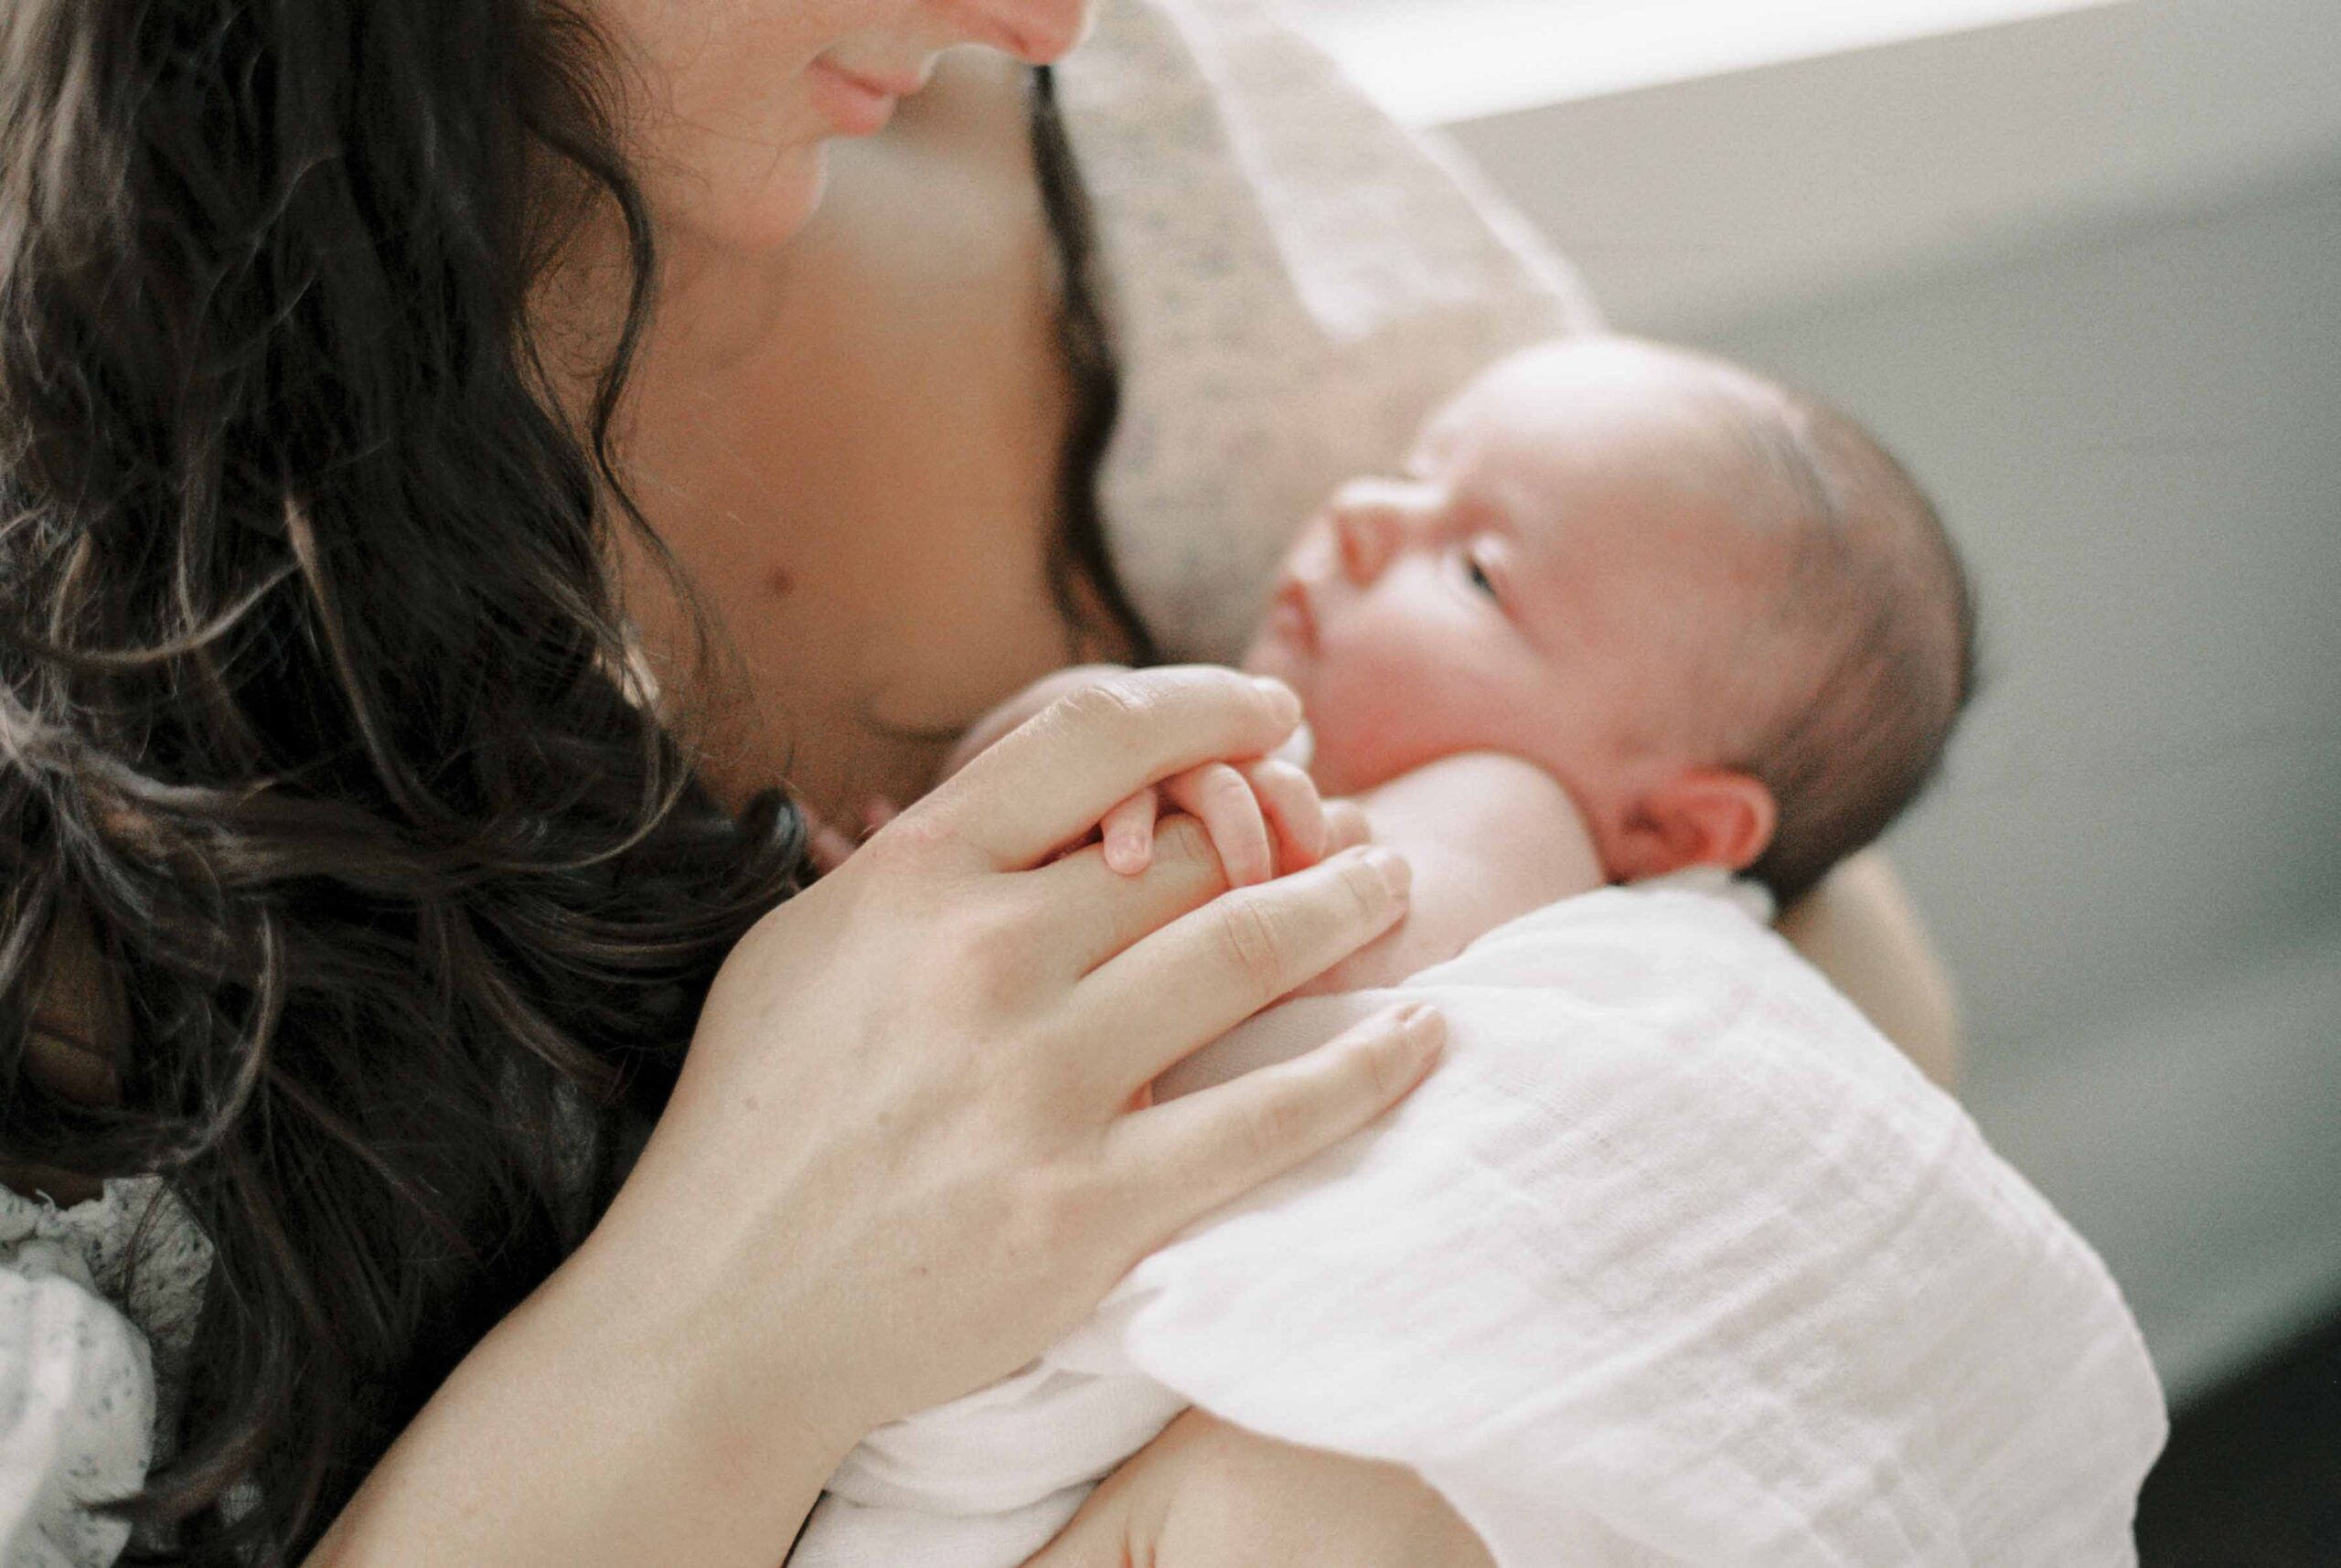 Detail photo of a mother holding a newborn's fingers